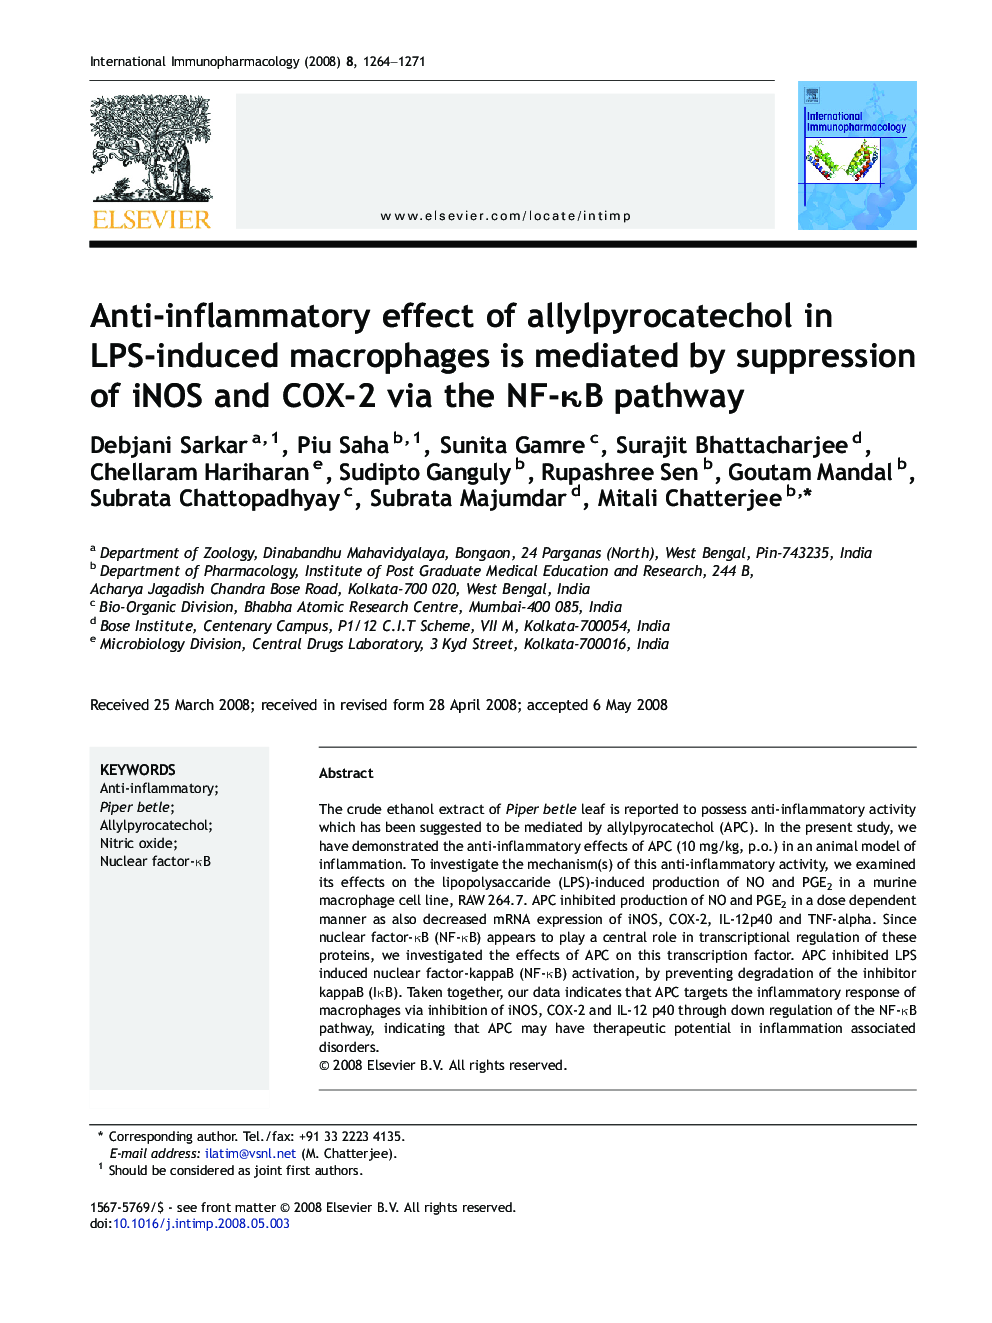 Anti-inflammatory effect of allylpyrocatechol in LPS-induced macrophages is mediated by suppression of iNOS and COX-2 via the NF-κB pathway